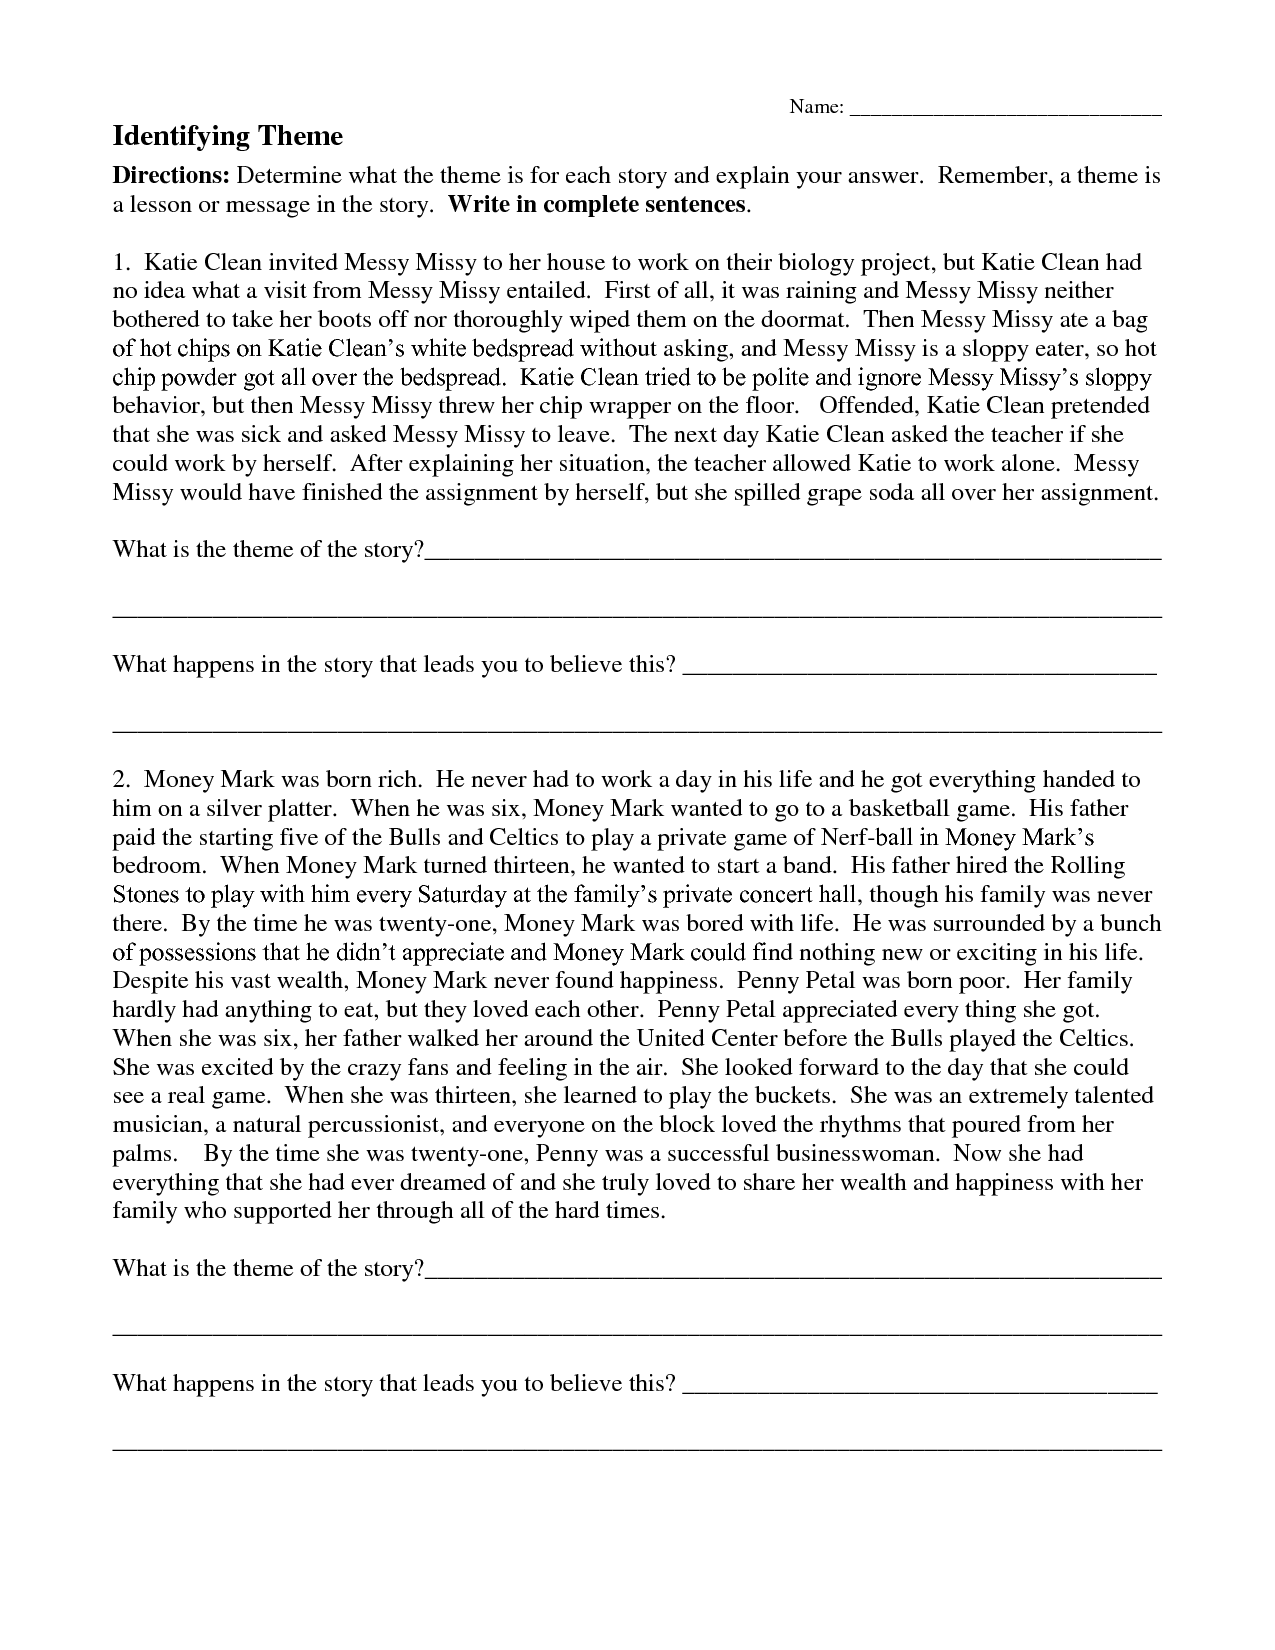 15 Best Images of Determining Theme Worksheets  Theme Worksheets 3rd Grade, Reading Theme 